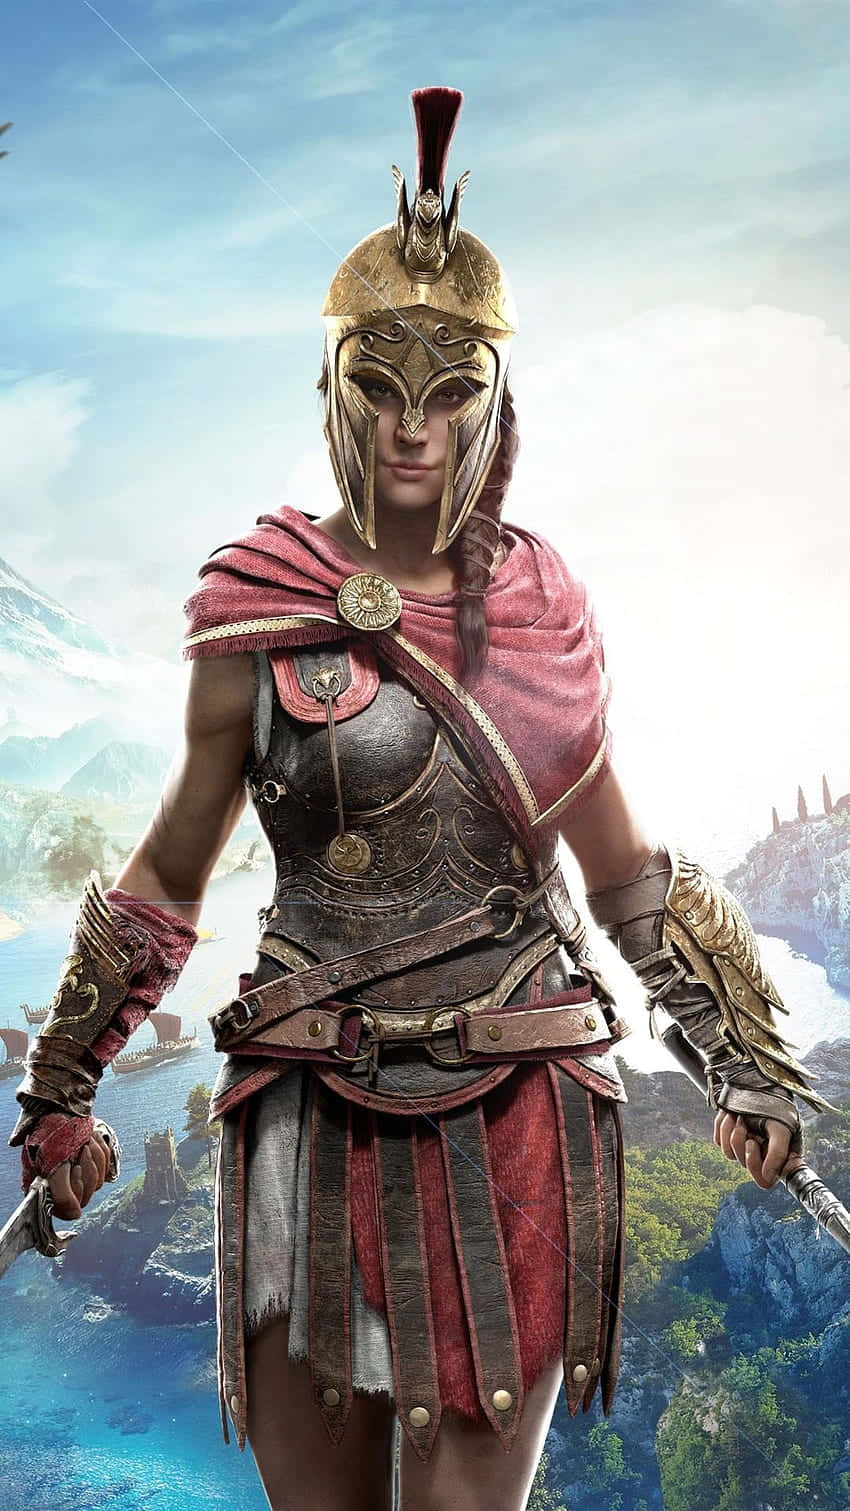 Become a Legendary Hero in Android Assassin's Creed Odyssey